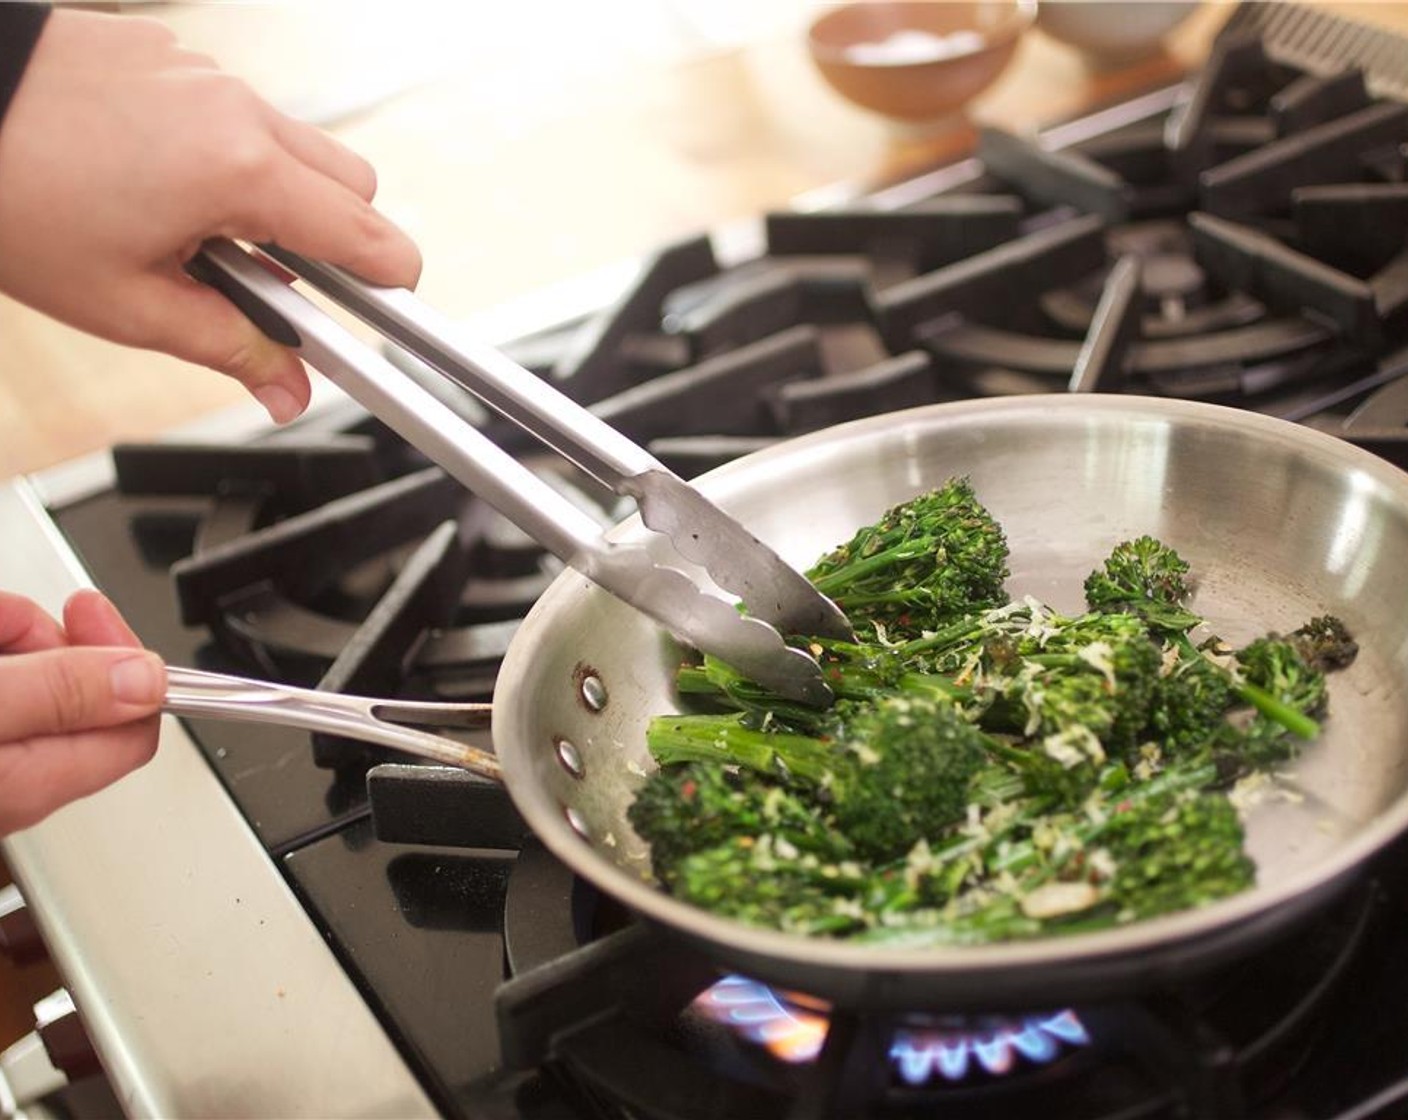 step 8 Heat two tablespoons of olive oil in a large saute pan over medium heat. Place the Broccolini (1 3/4 cups), Salt (1/4 tsp), and Black Pepper (1/4 teaspoon), and cook for four to five minutes.